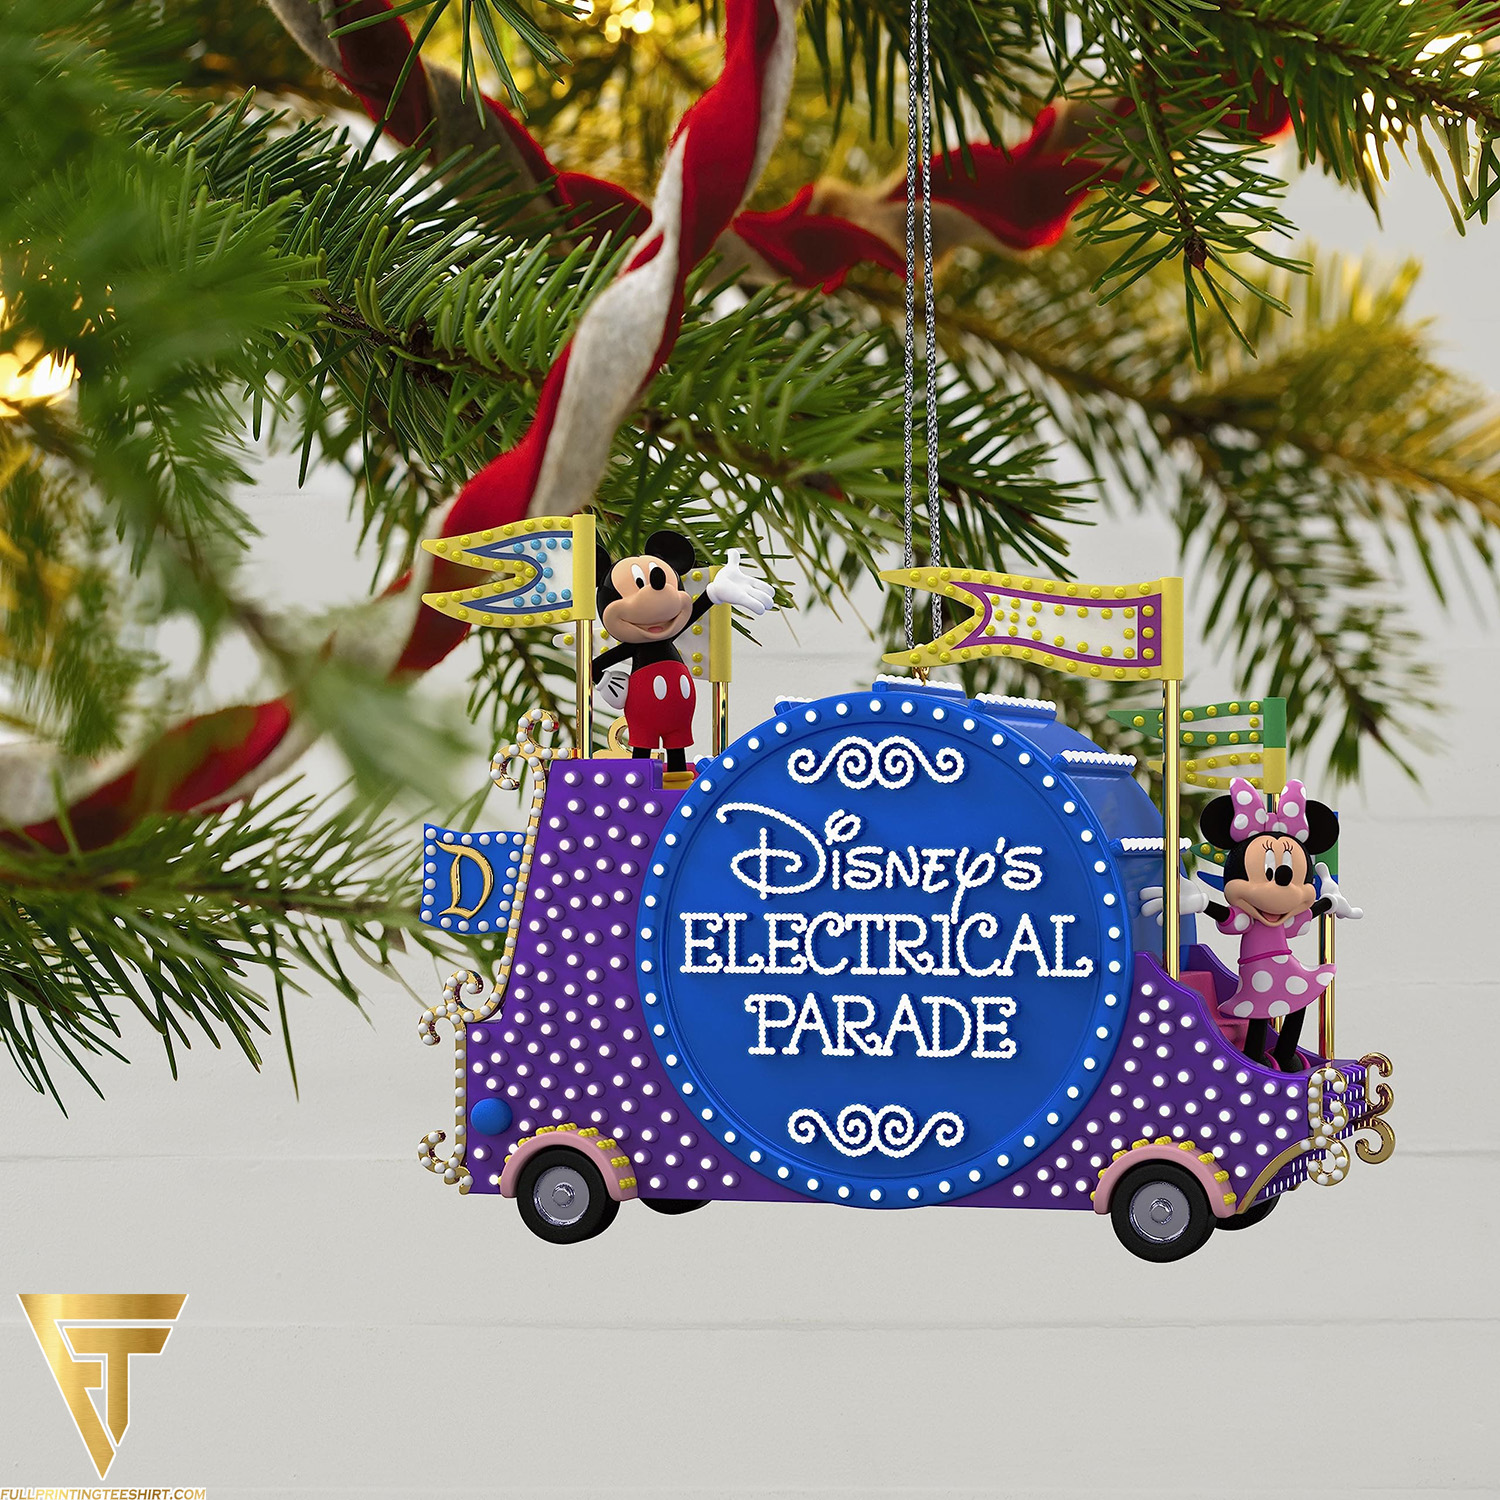 Enchant Your Holidays with Disney's Electrical Parade Ornaments A Magical Ornament Collection for Christmas